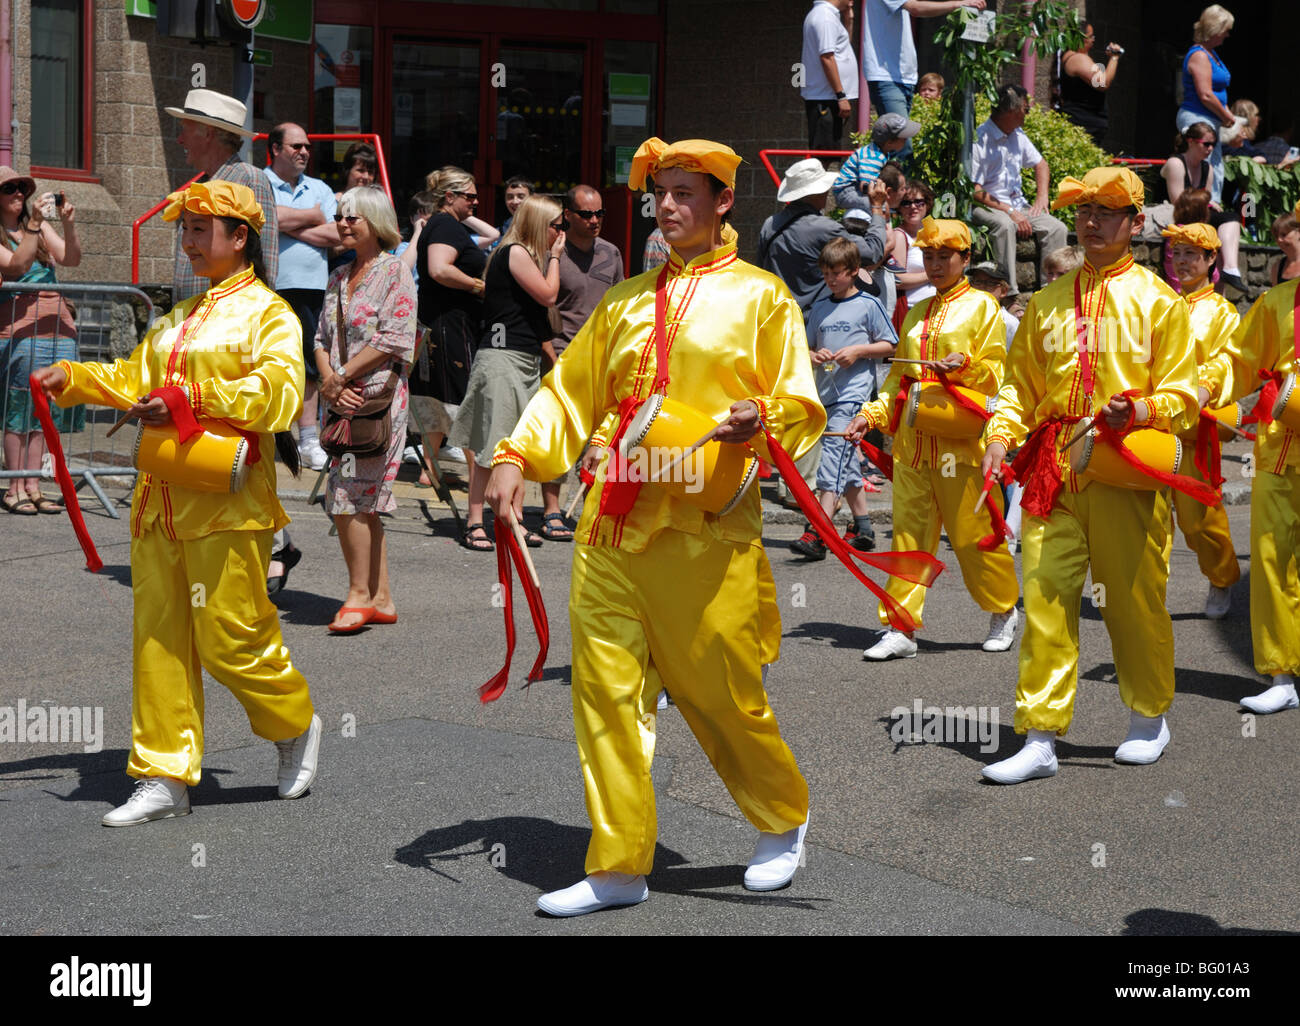 members of the ancient chinese culture 'falun gong ' marching through the streets of penzance,cornwall,uk Stock Photo